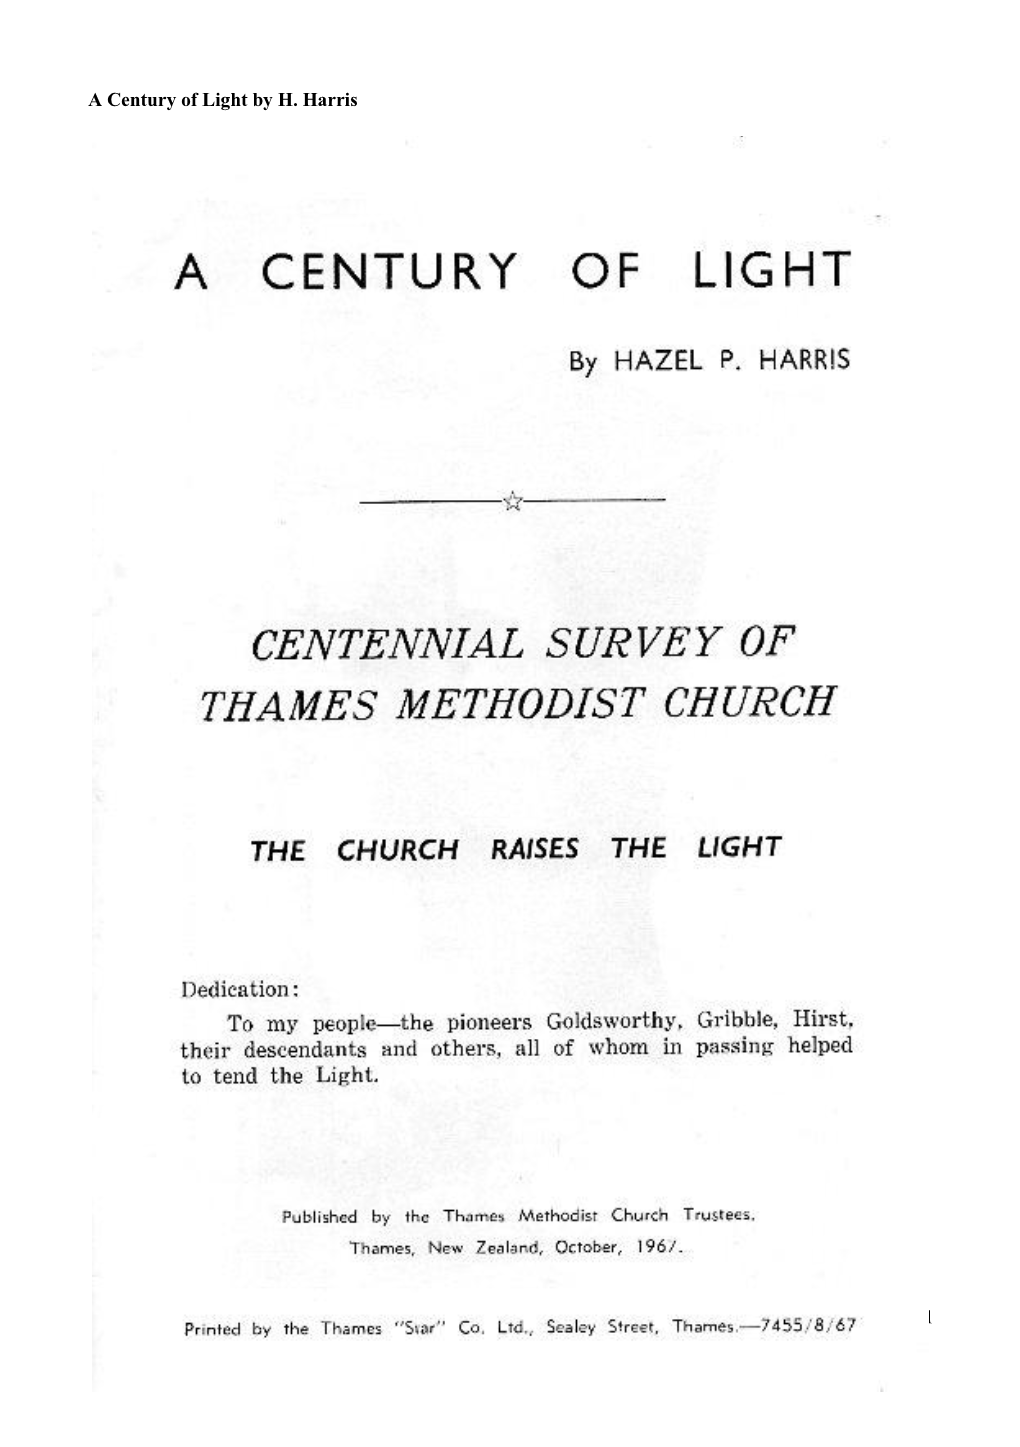 A Century of Light by H. Harris Wesley Historical Society (NZ)